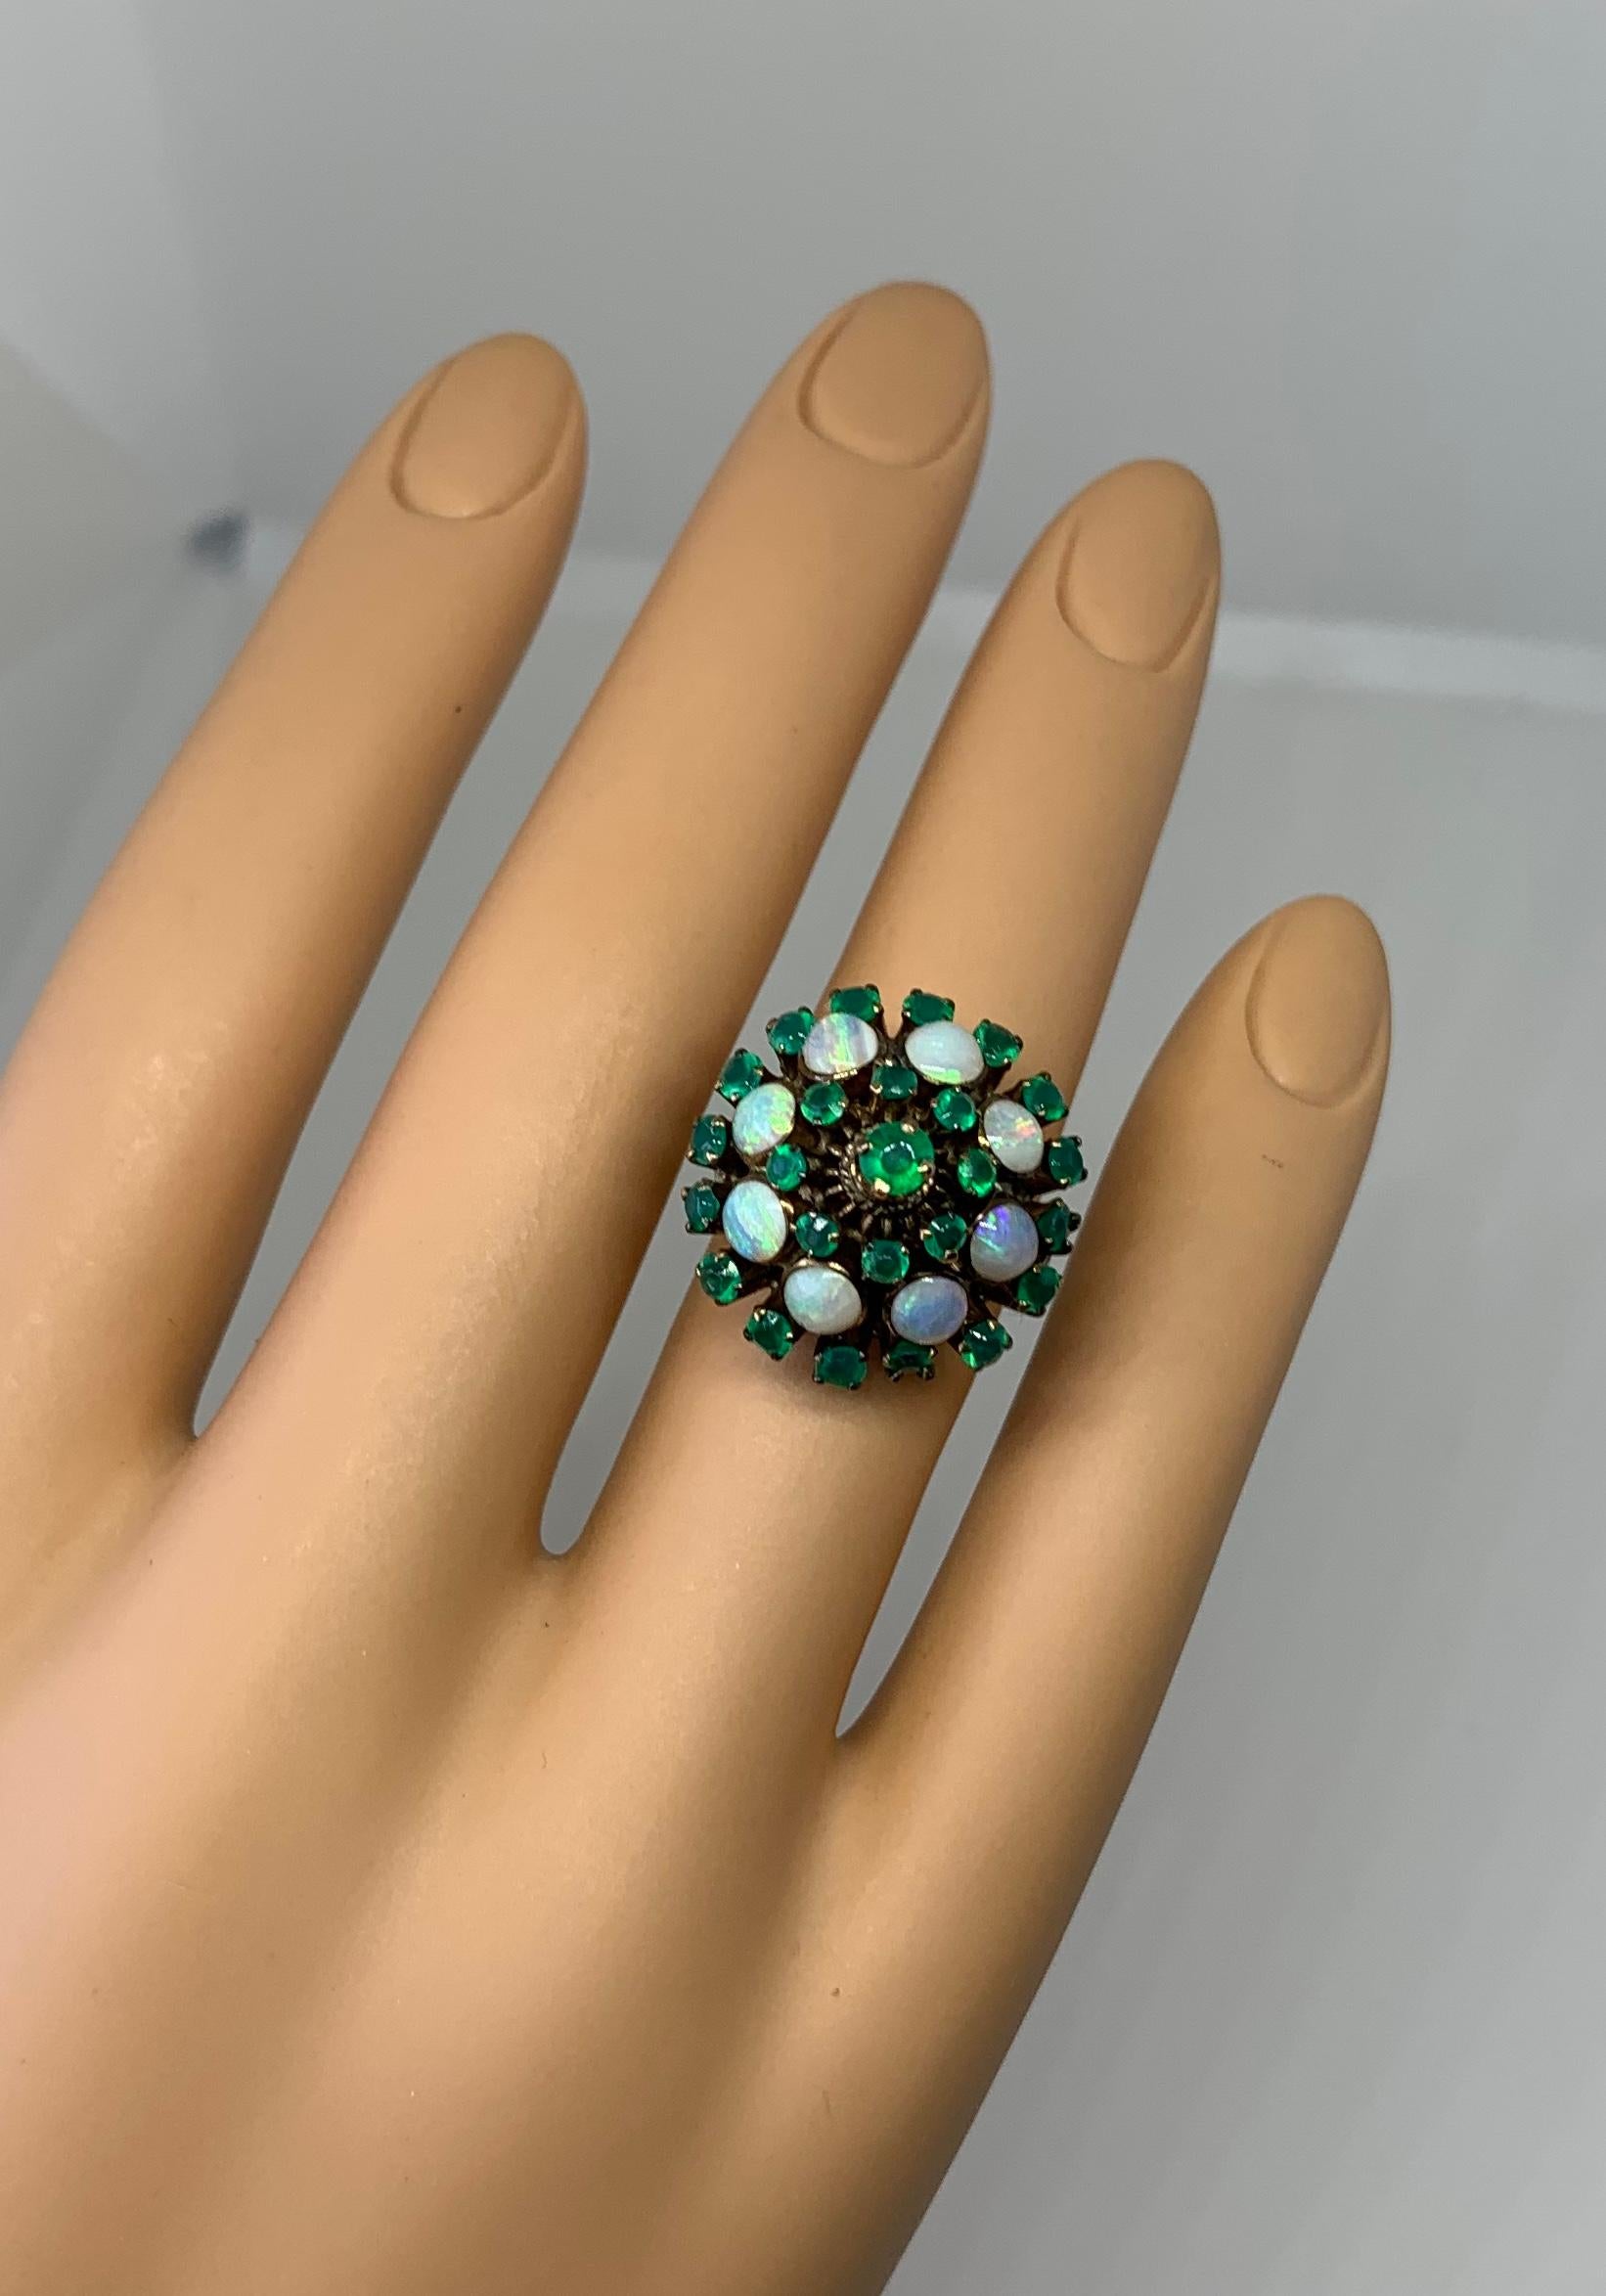 Fire Opal Emerald Ring Art Deco Princess Bombe Gold Opals Blue Green Yellow For Sale 1